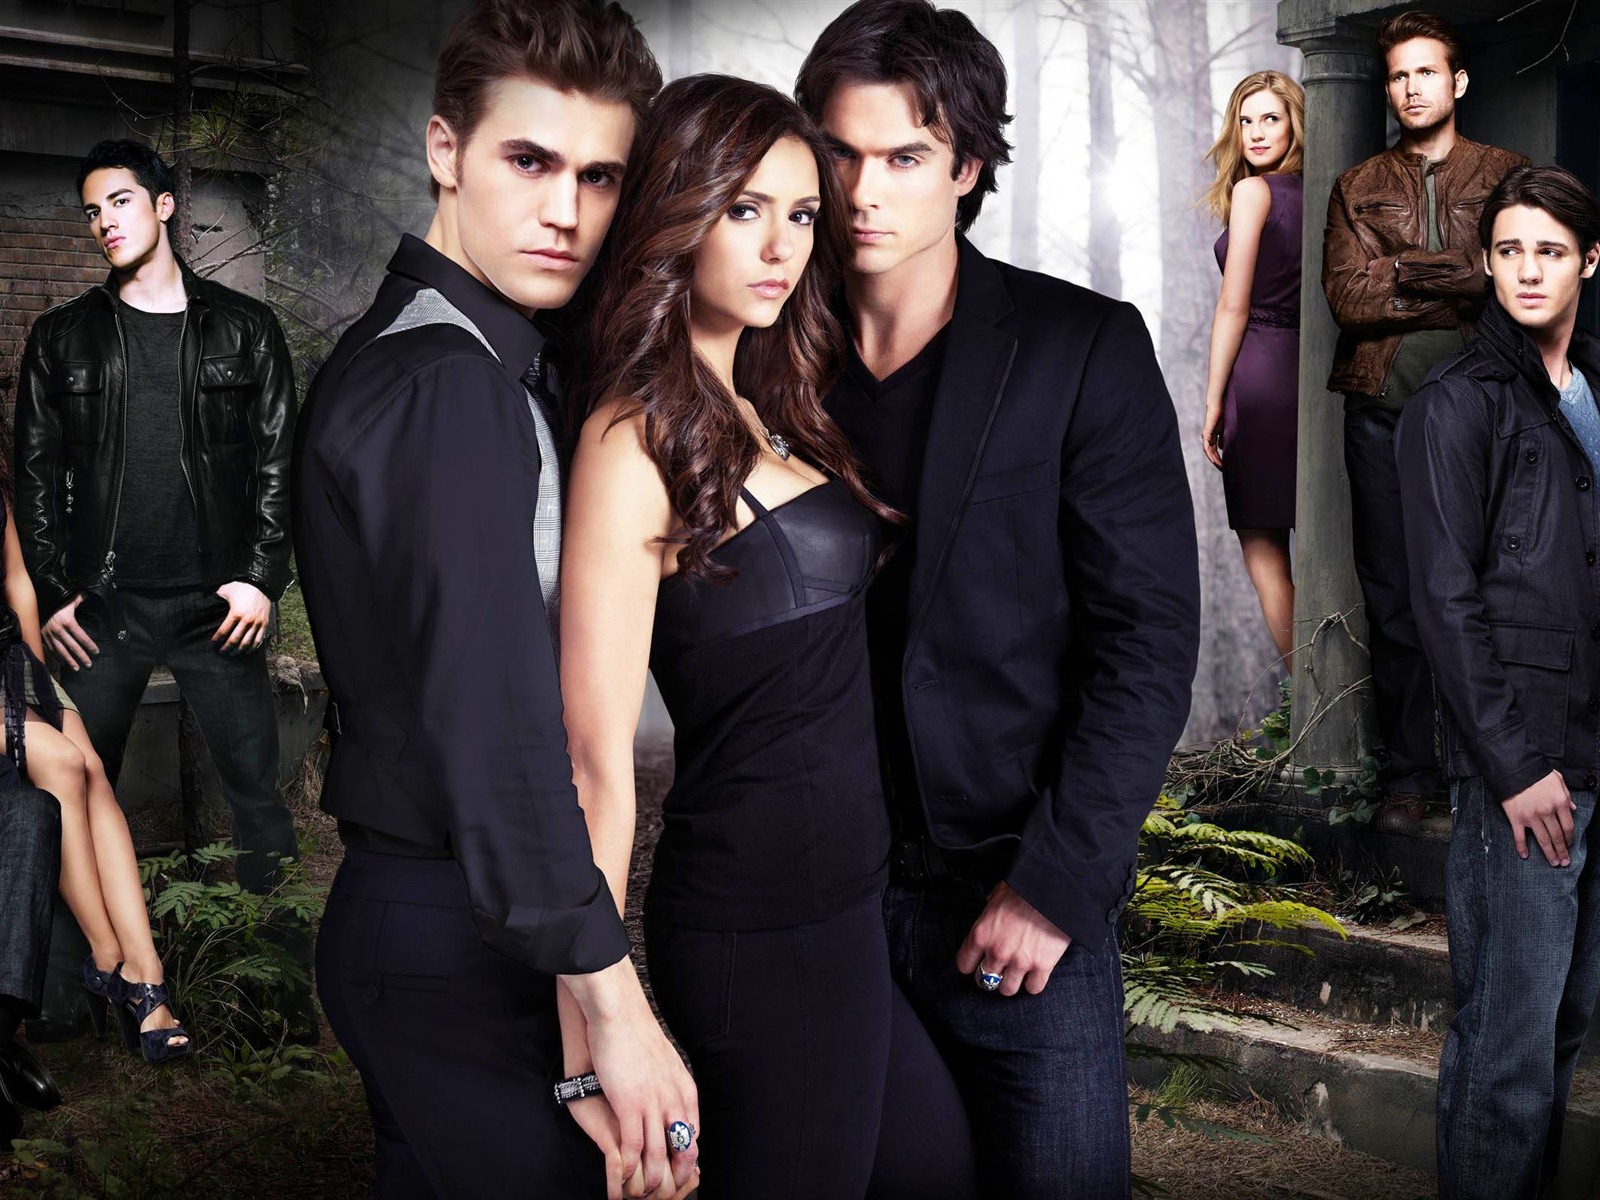 The Vampire Diaries wallpapers HD #12 - 1600x1200